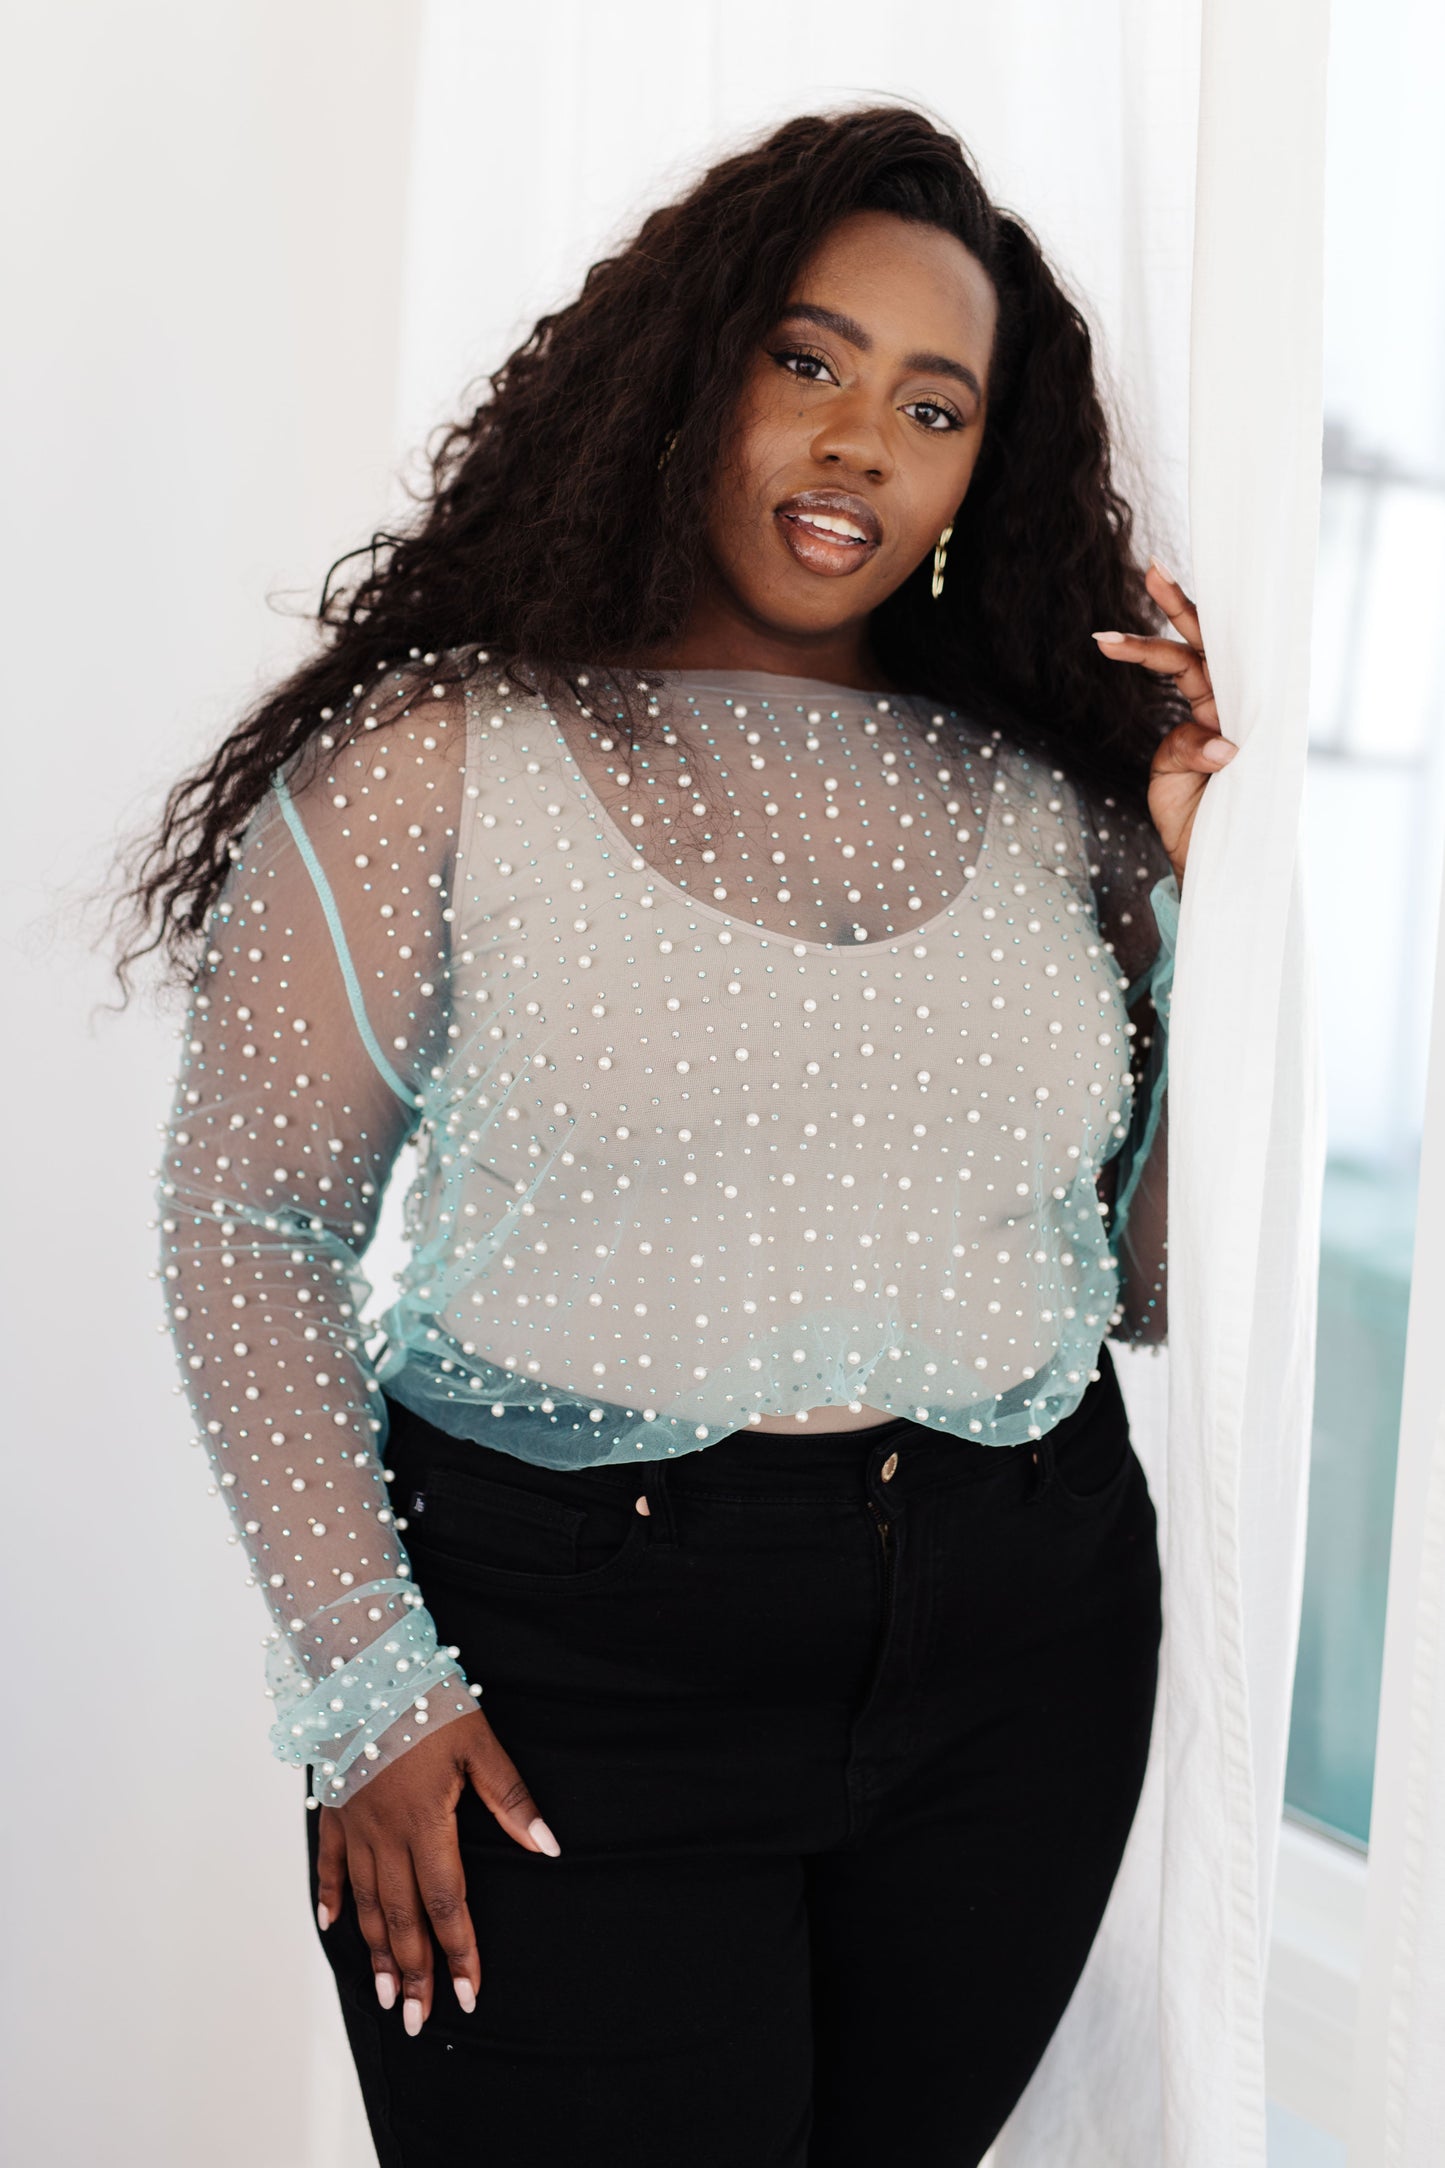 Pearl Diver Layering Top in Light Cyan - FamFancy Boutique